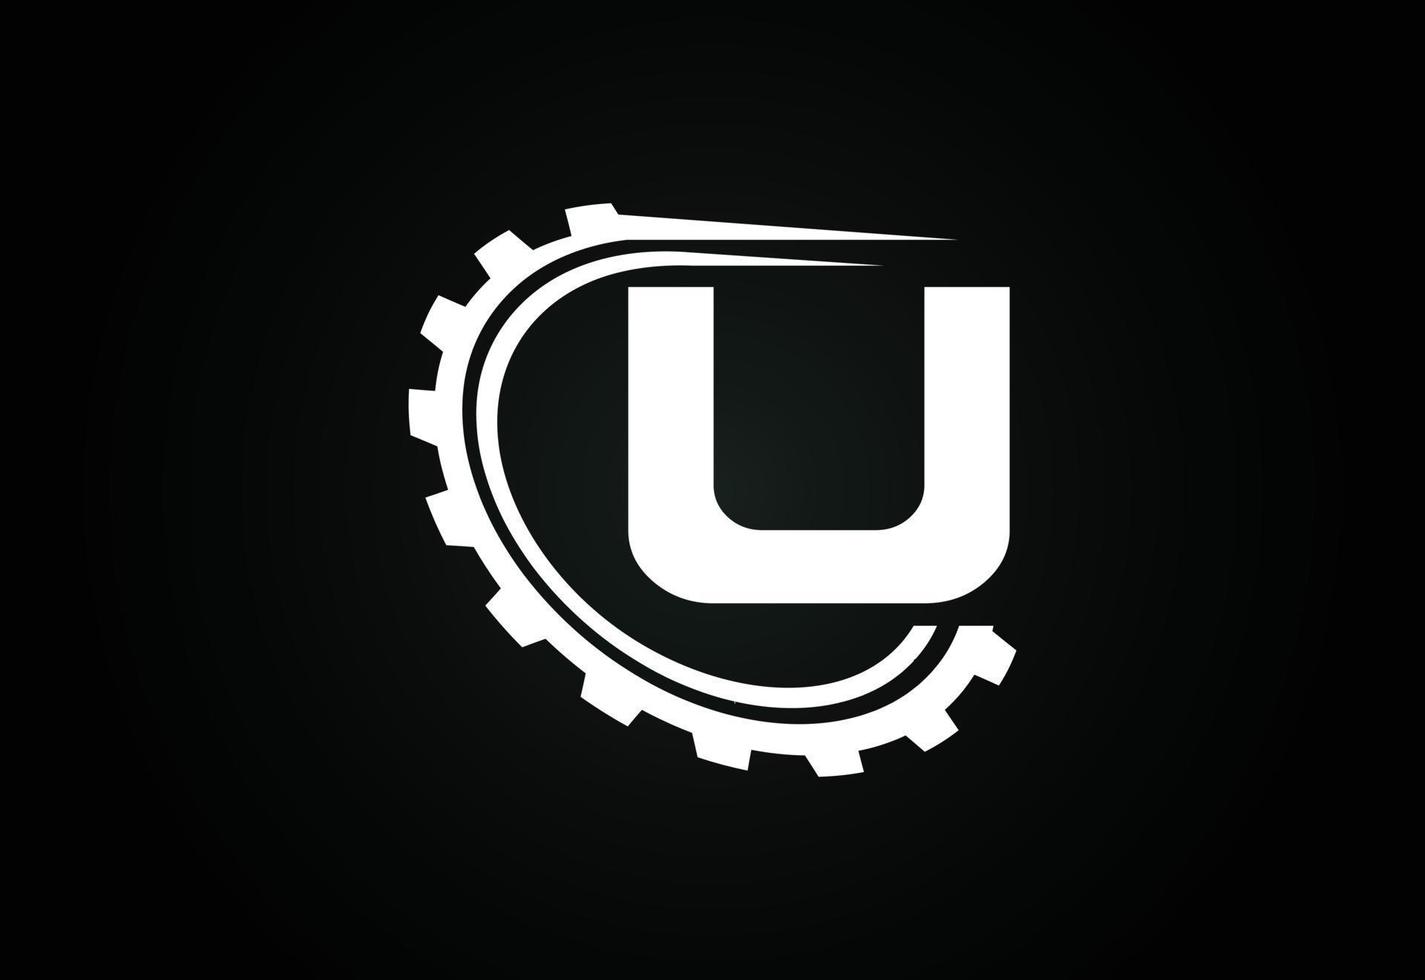 Initial U alphabet with a gear. Gear engineer logo design. Logo for automotive, mechanical, technology, setting, repair business, and company identity vector